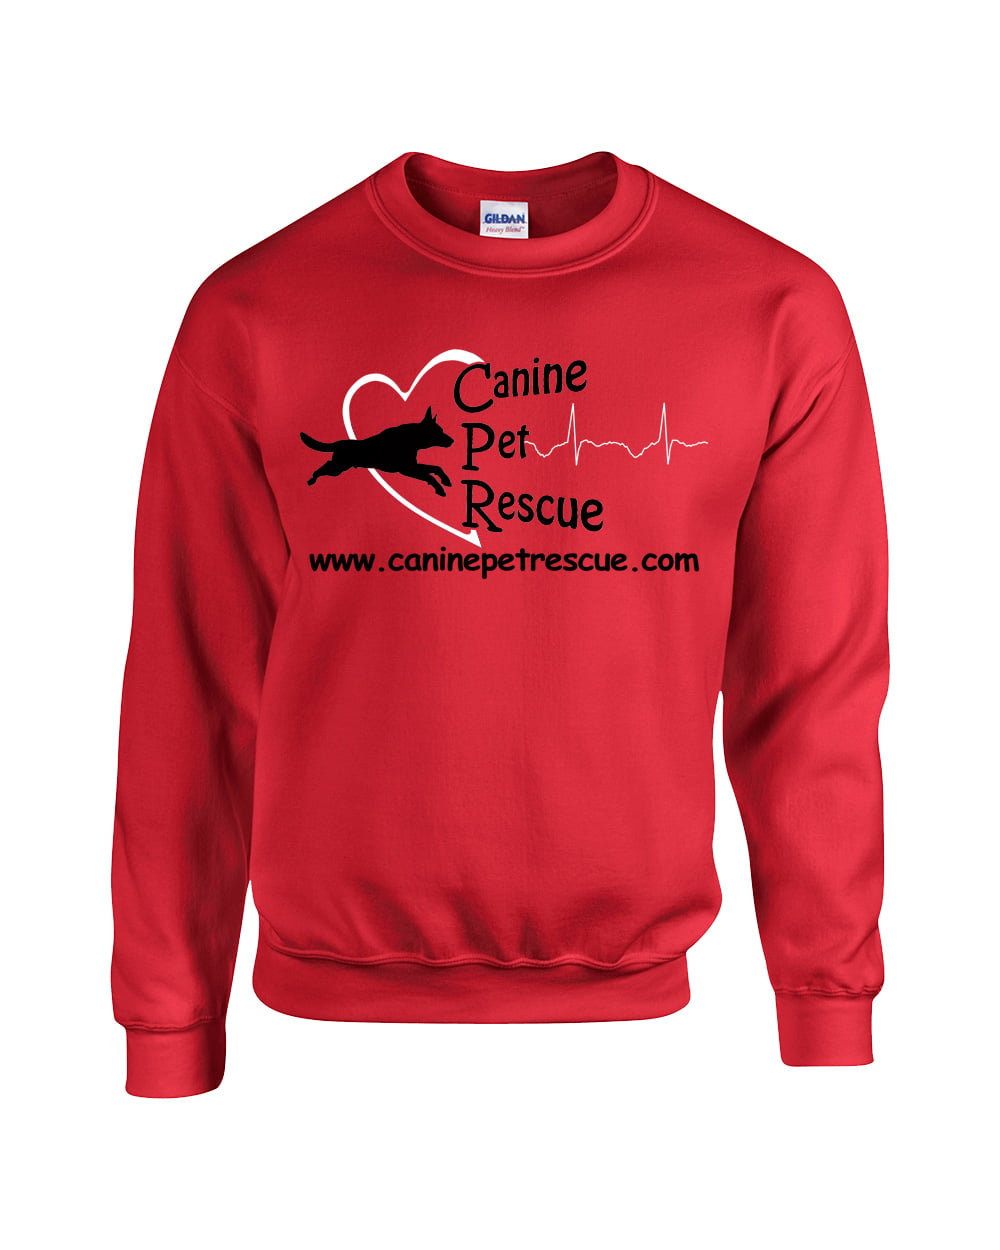 CPR Canine Pet Rescue Unisex Fit Womens Mens Adopt Shelter Crew Neck Sweatshirt